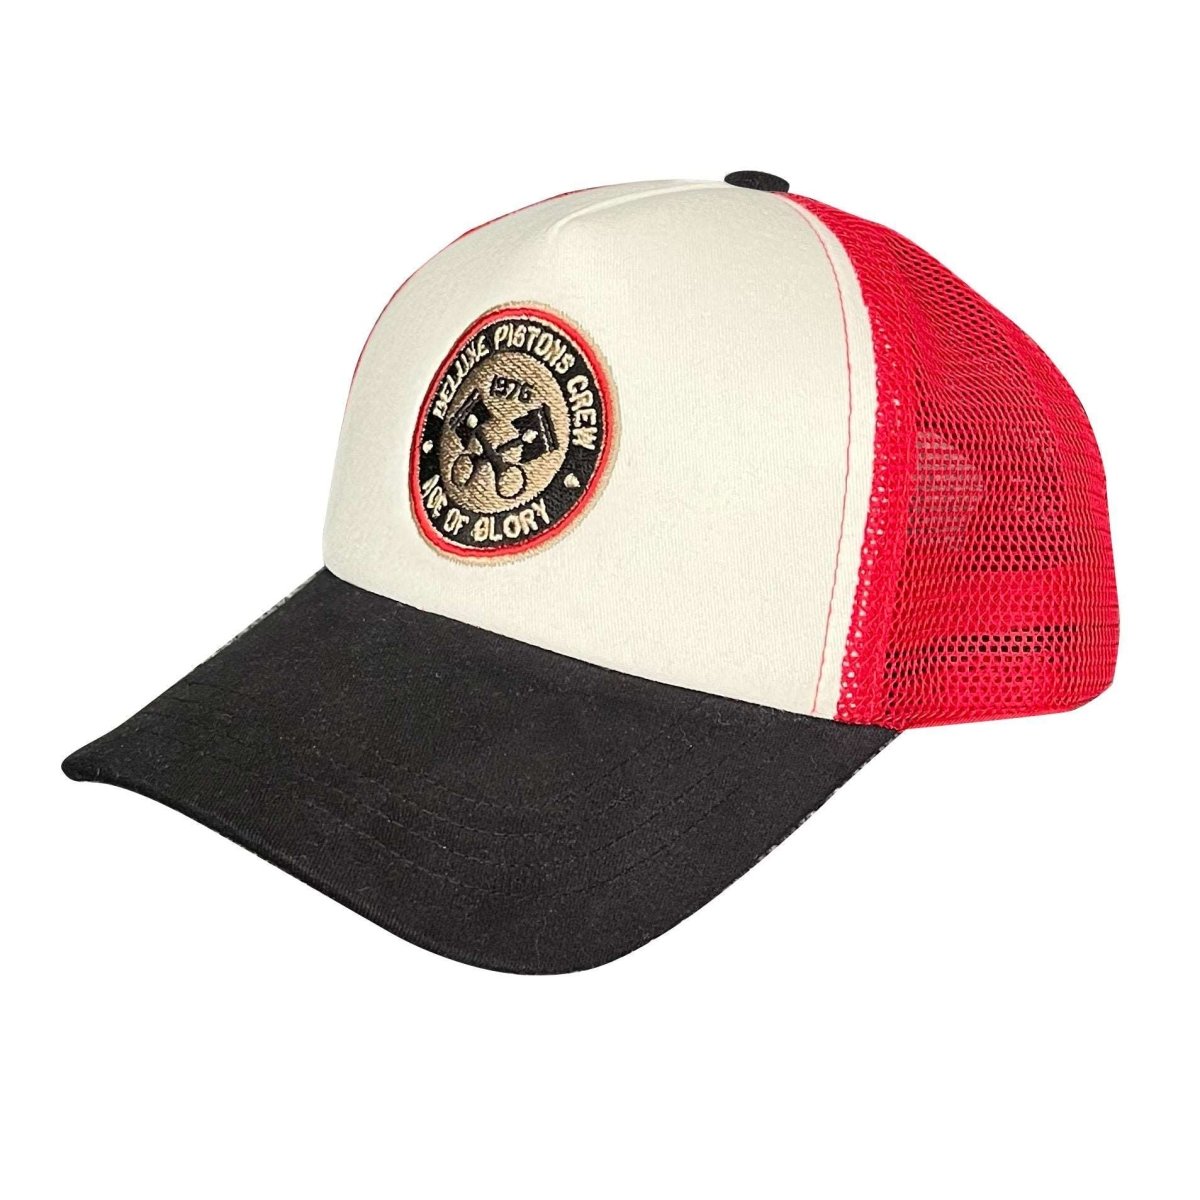 Age of Glory Deluxe Pistons Trucker Cap in Black Off-White Red